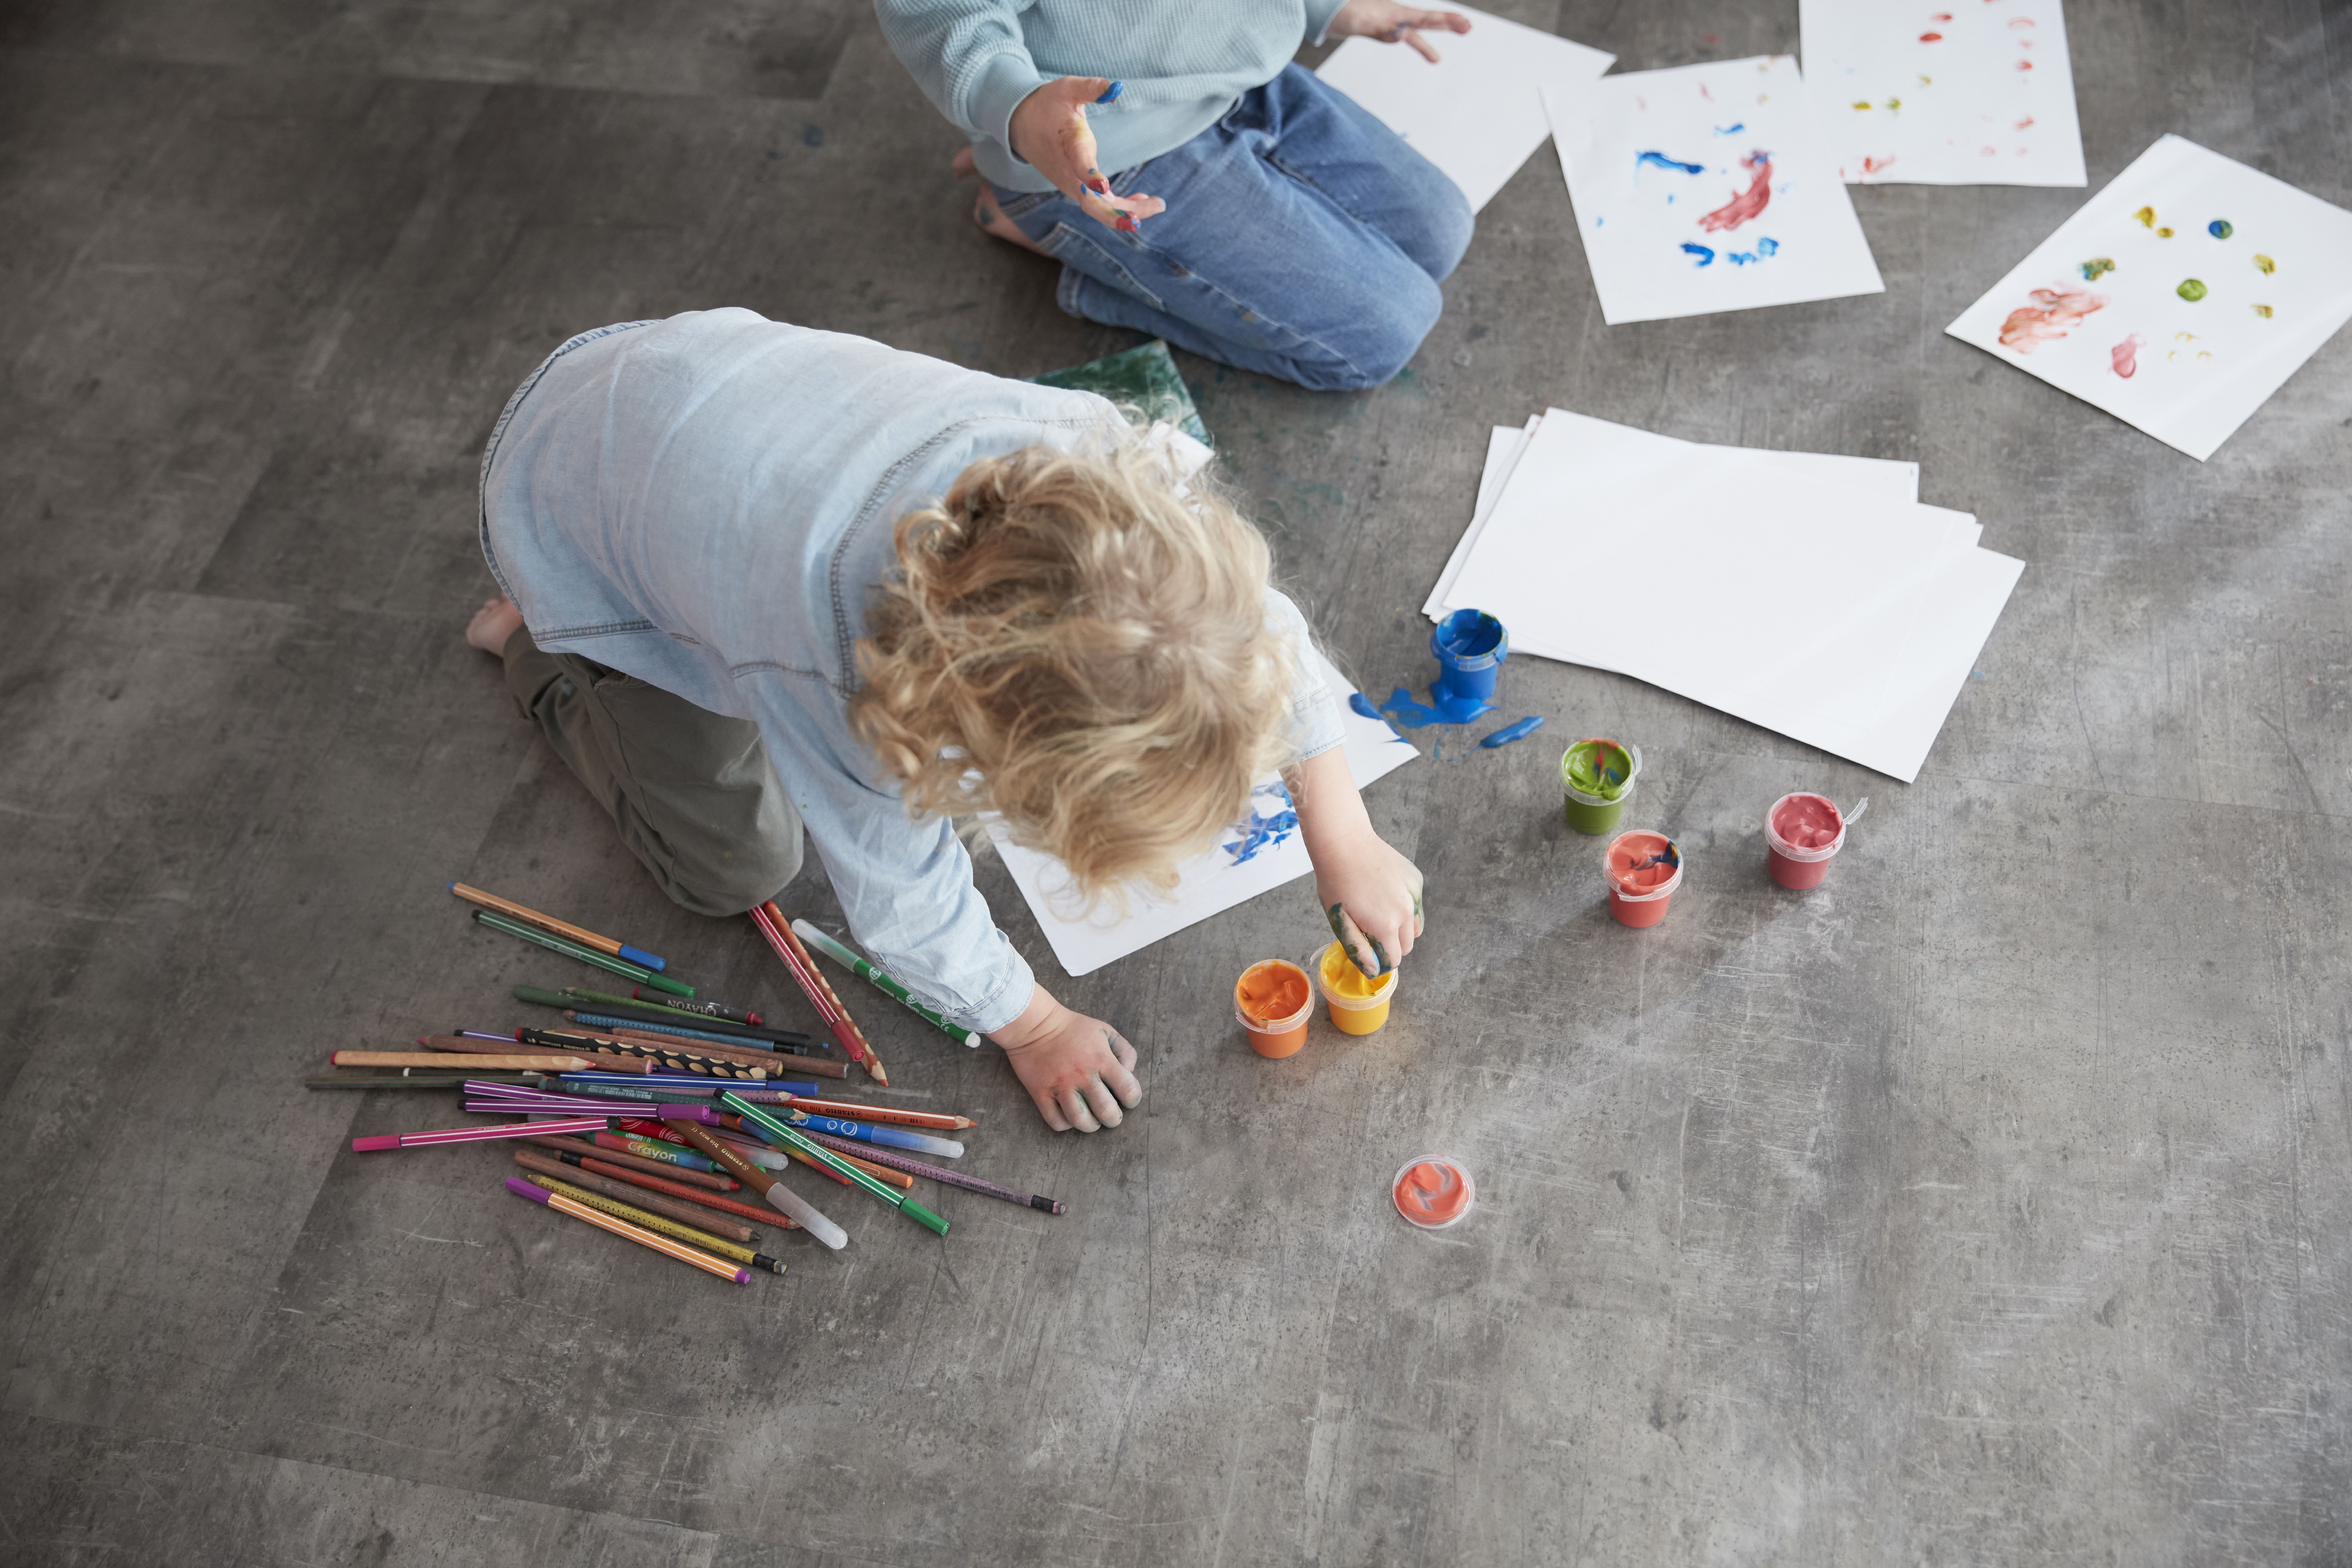 Best Floors For a Busy Family Home